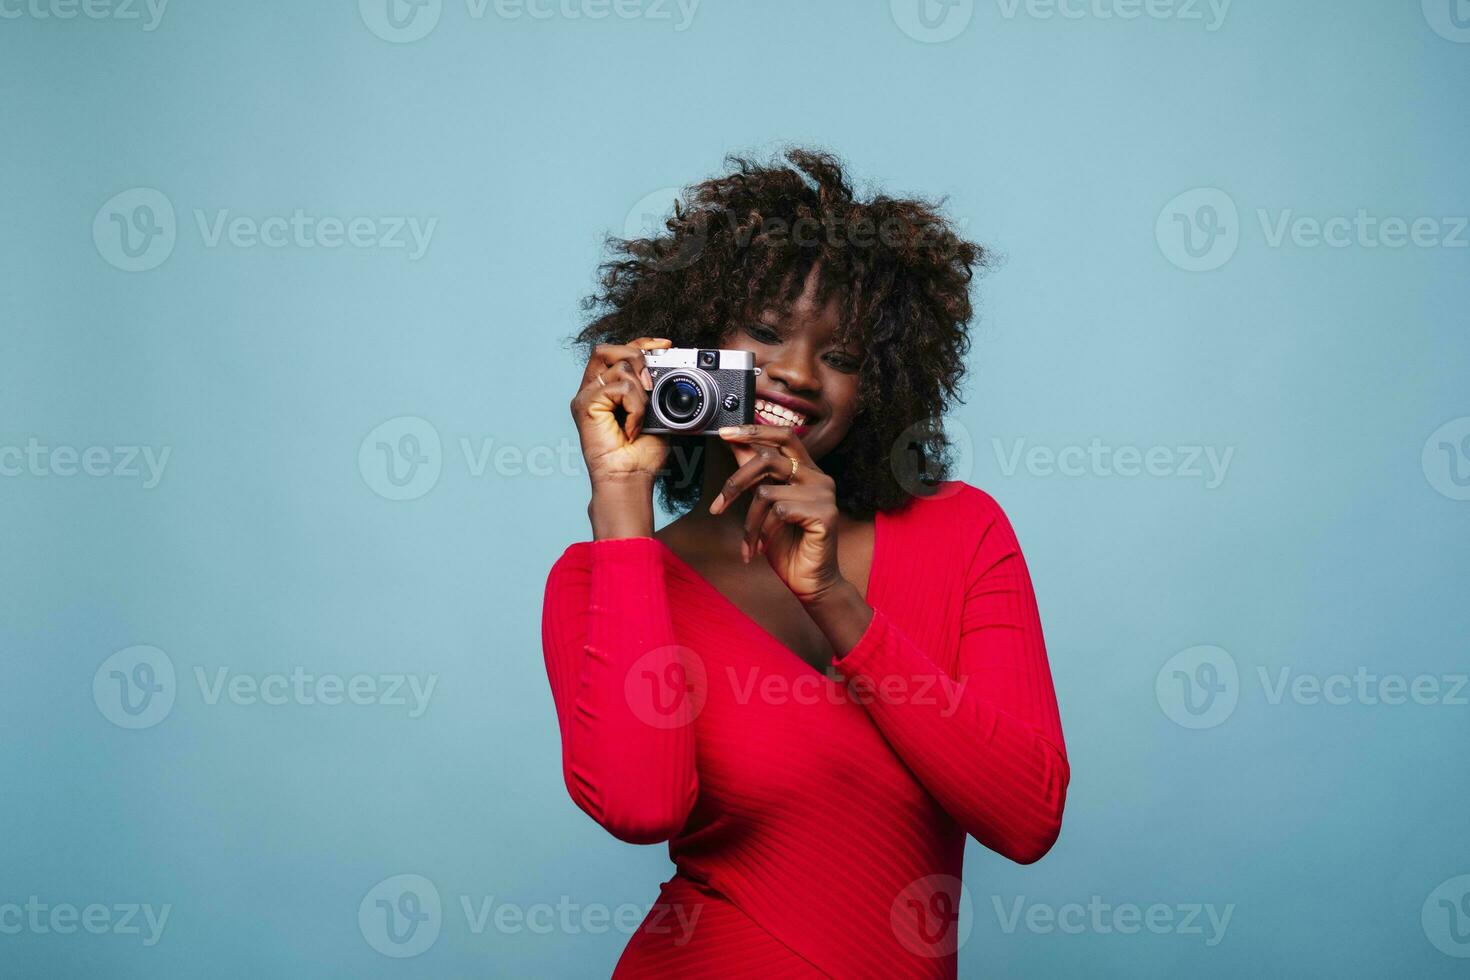 Portrait of happy young woman holding vintage camera in studio photo